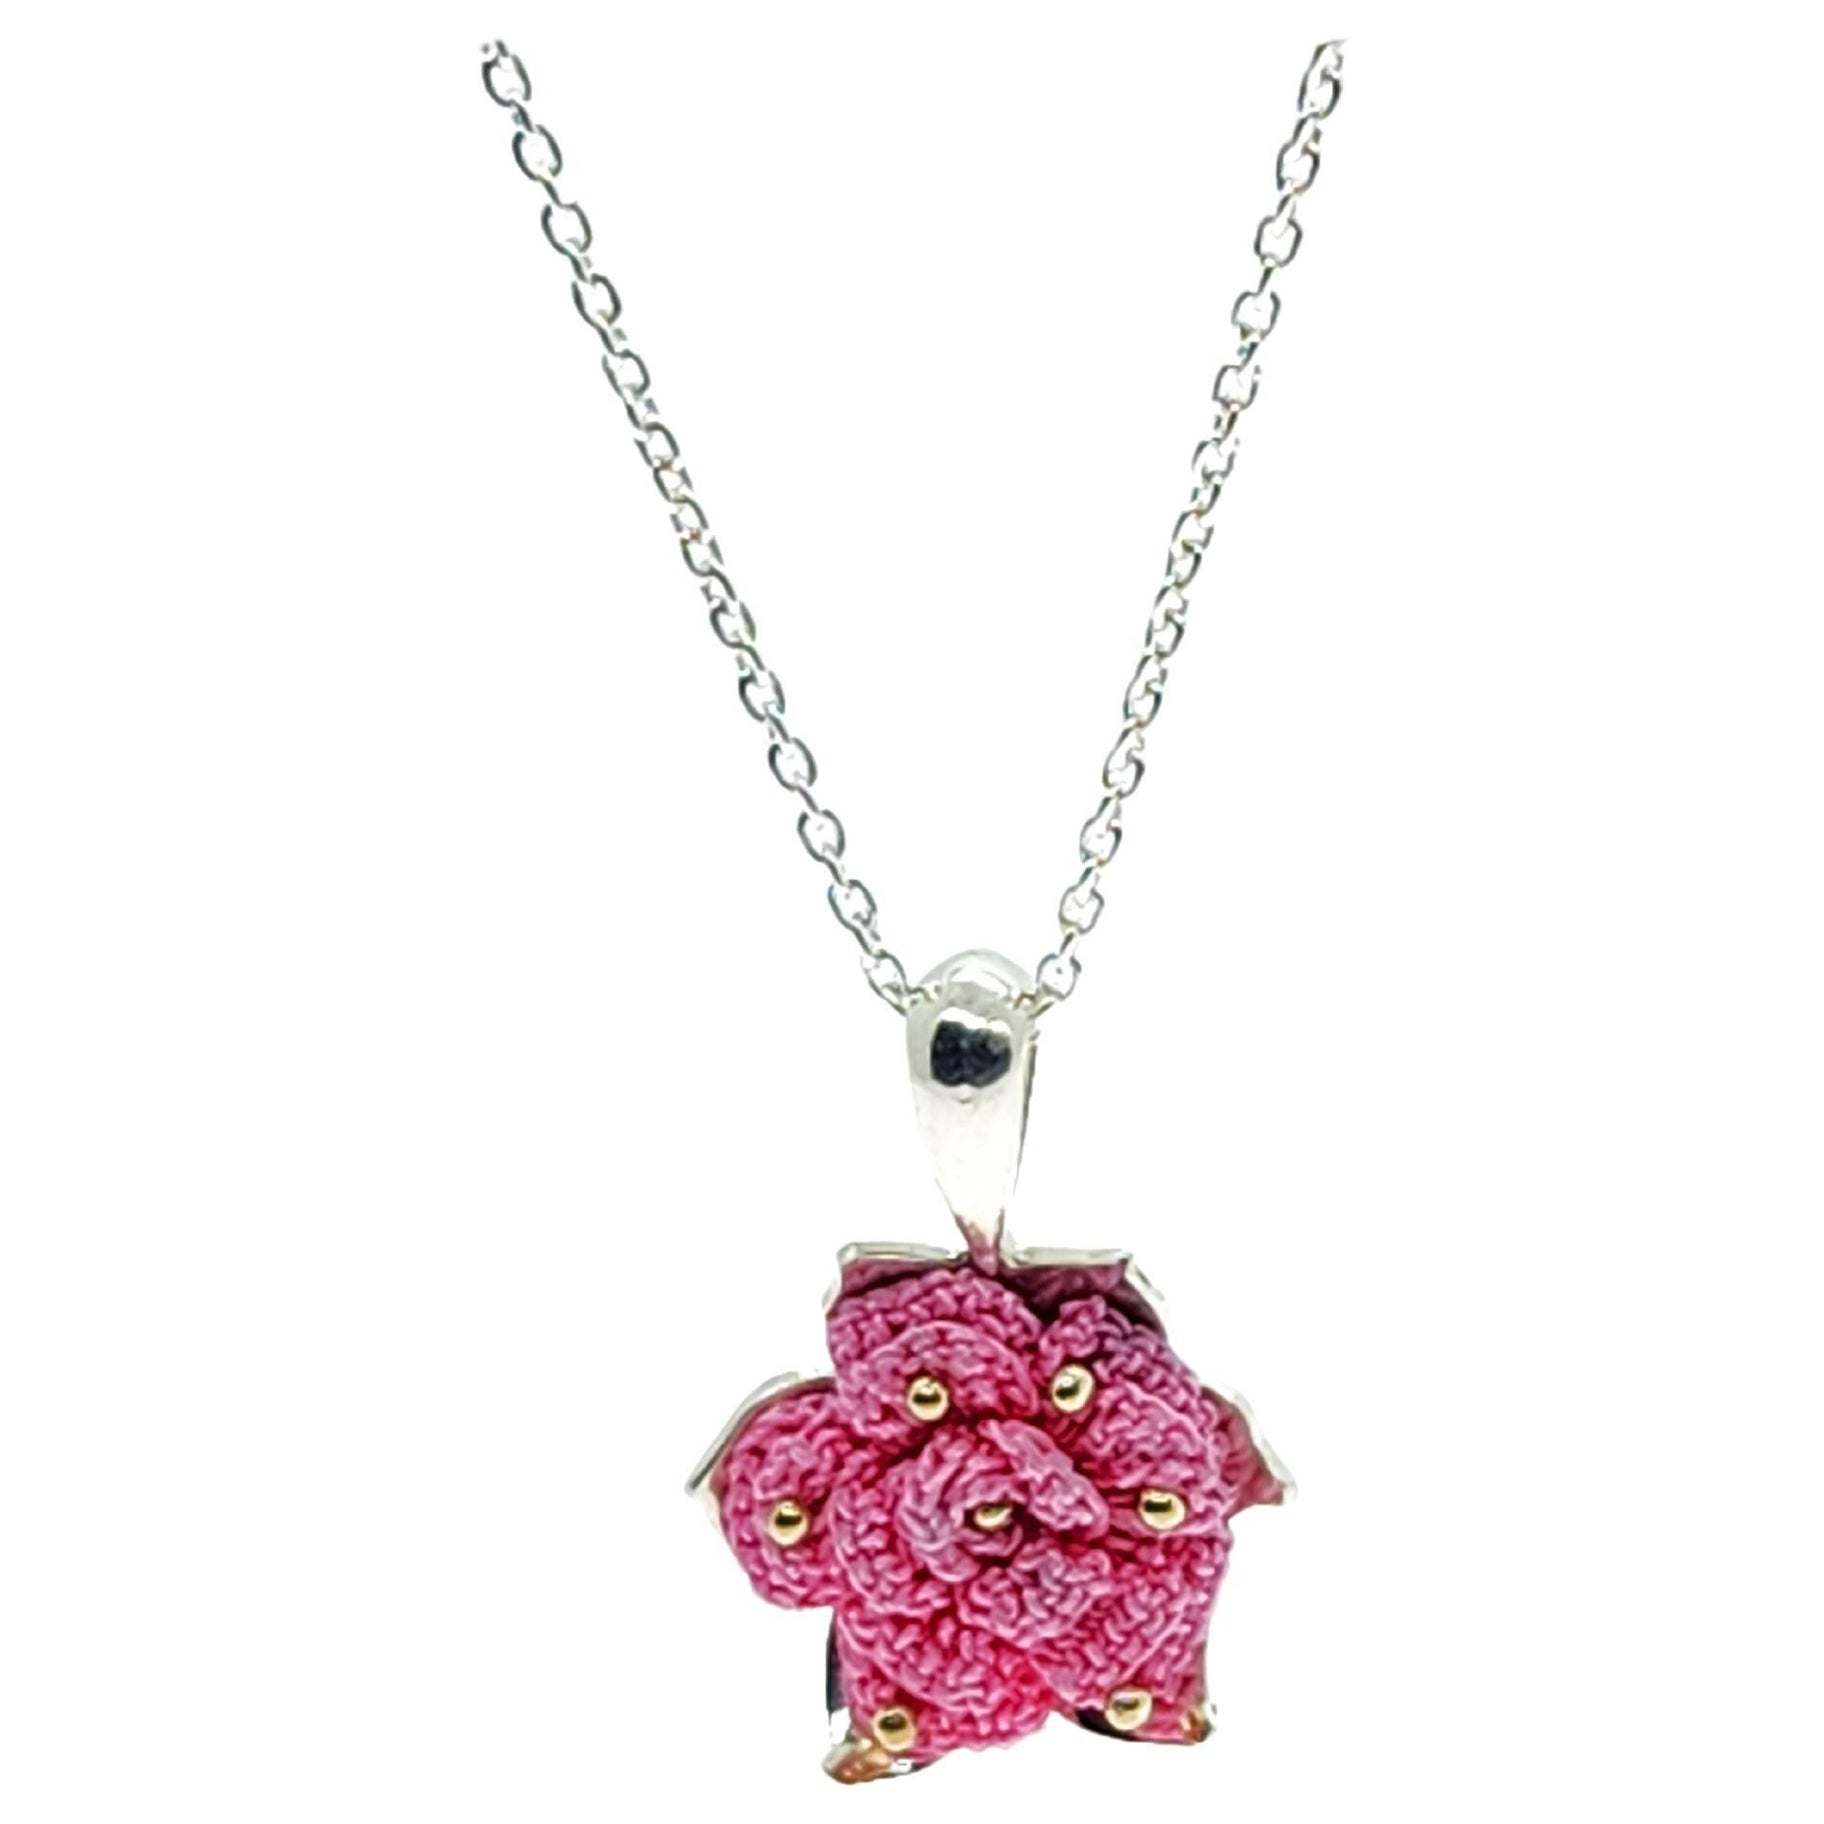 Hand Knit Flower Necklace in Handmade Sterling Silver and 14KY Setting #3 For Sale